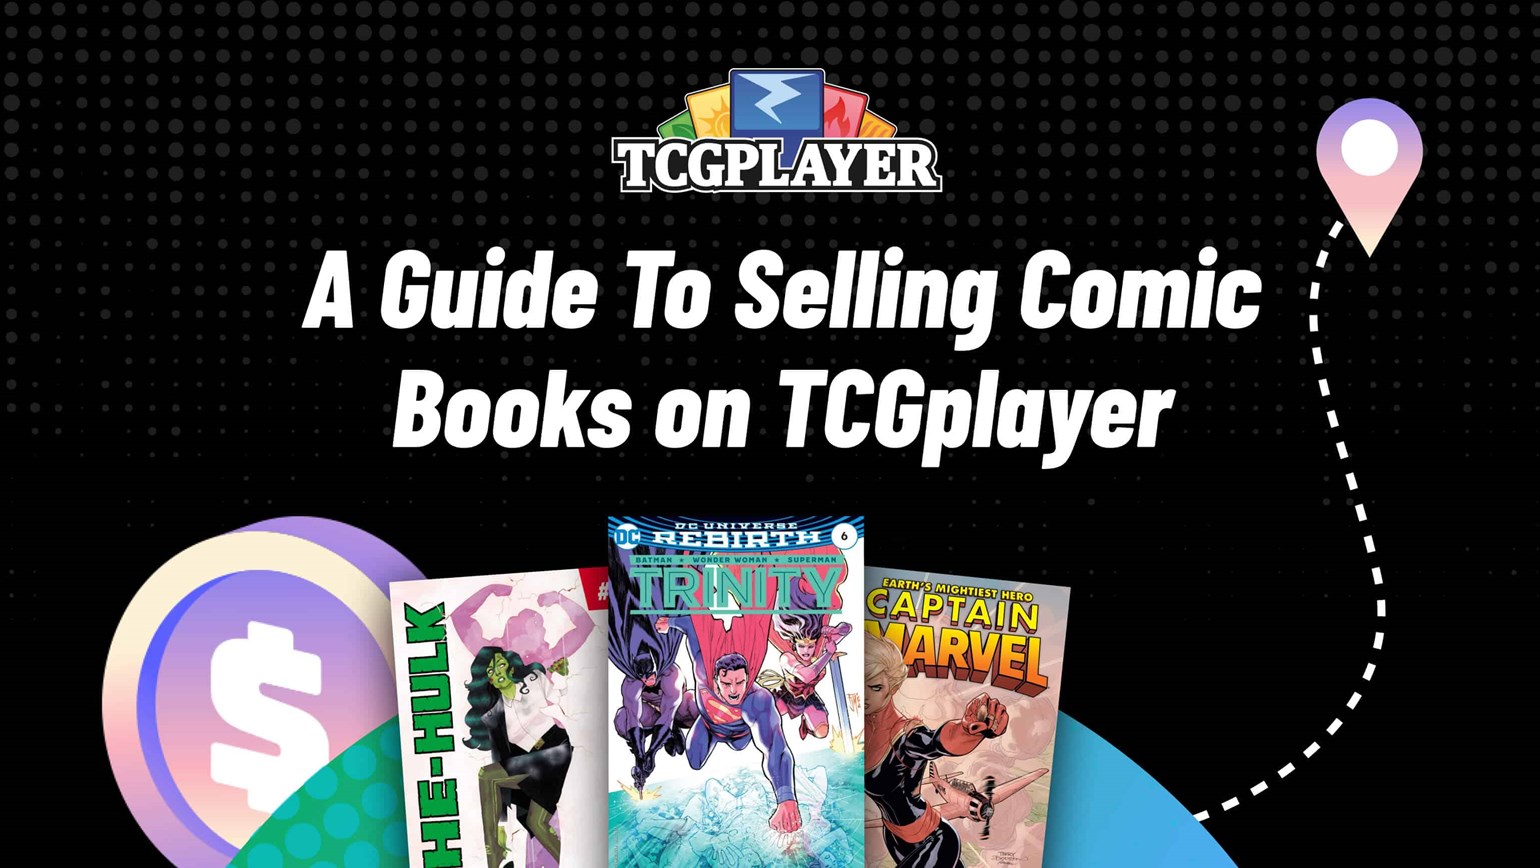 A Guide To Selling Comic Books on TCGplayer